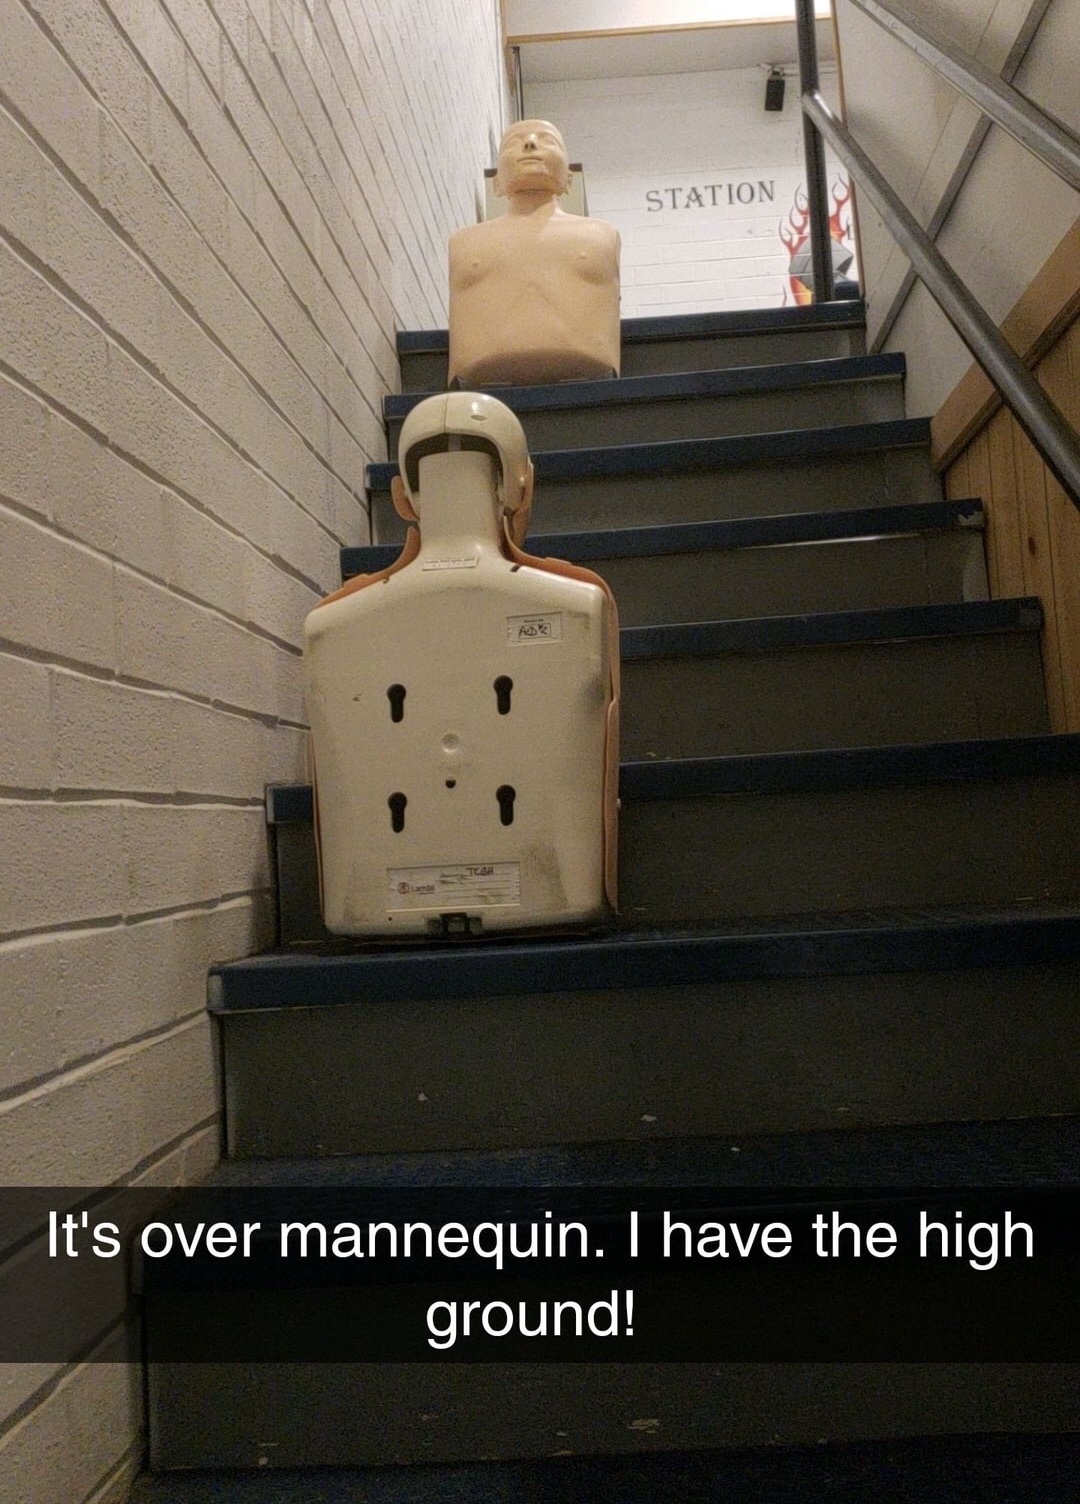 memes - lighting - Station It's over mannequin. I have the high ground!